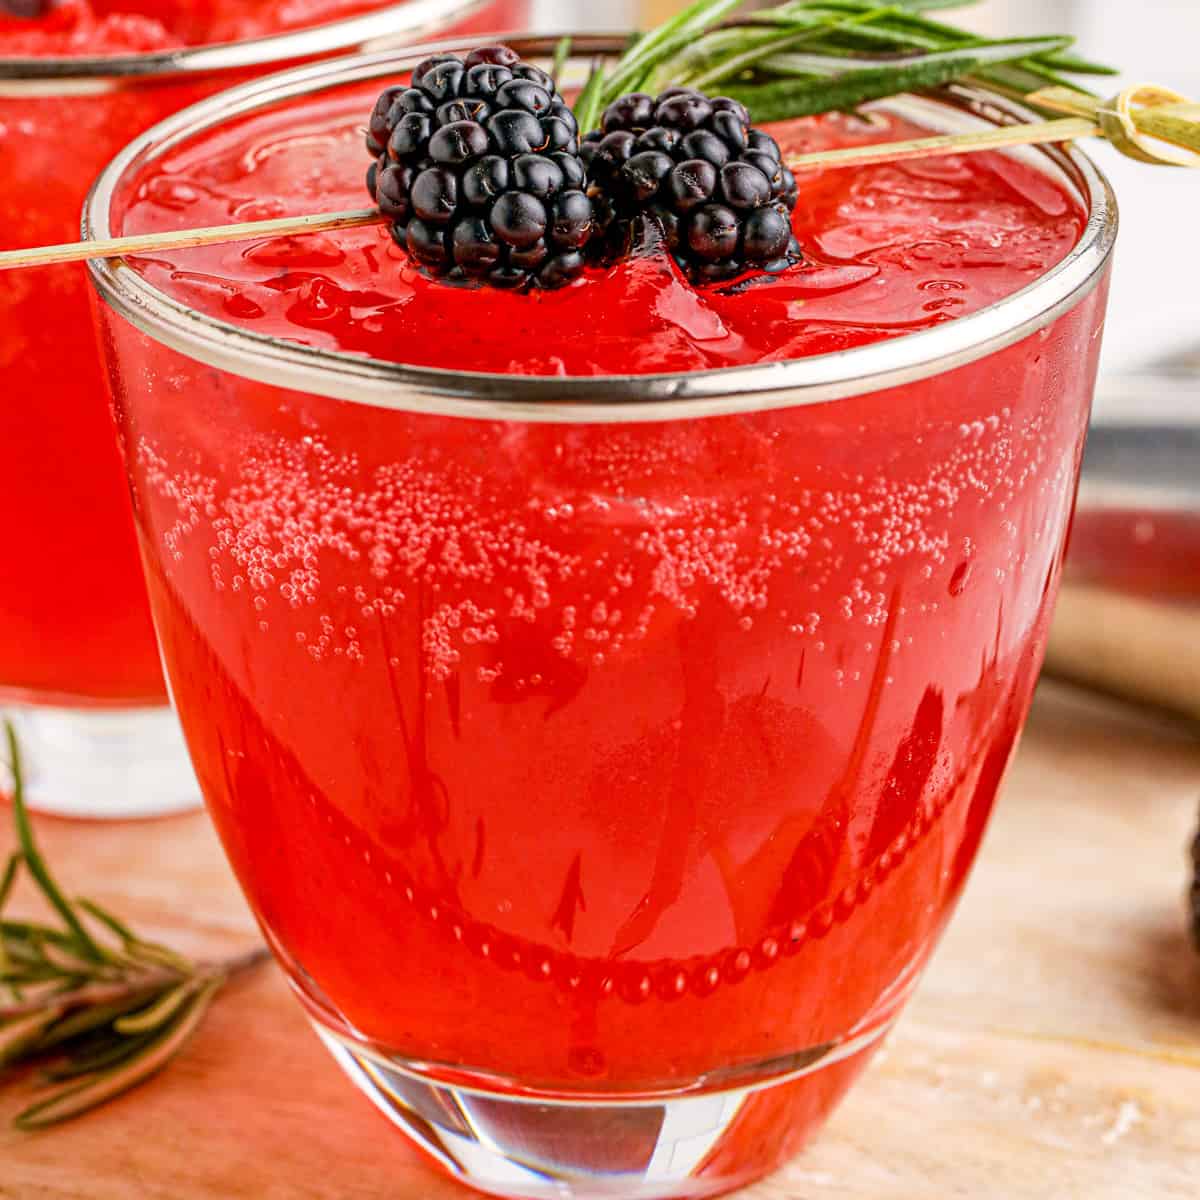 Close up square image of drink in metal rimmed glass garnished with blackberries and thyme.